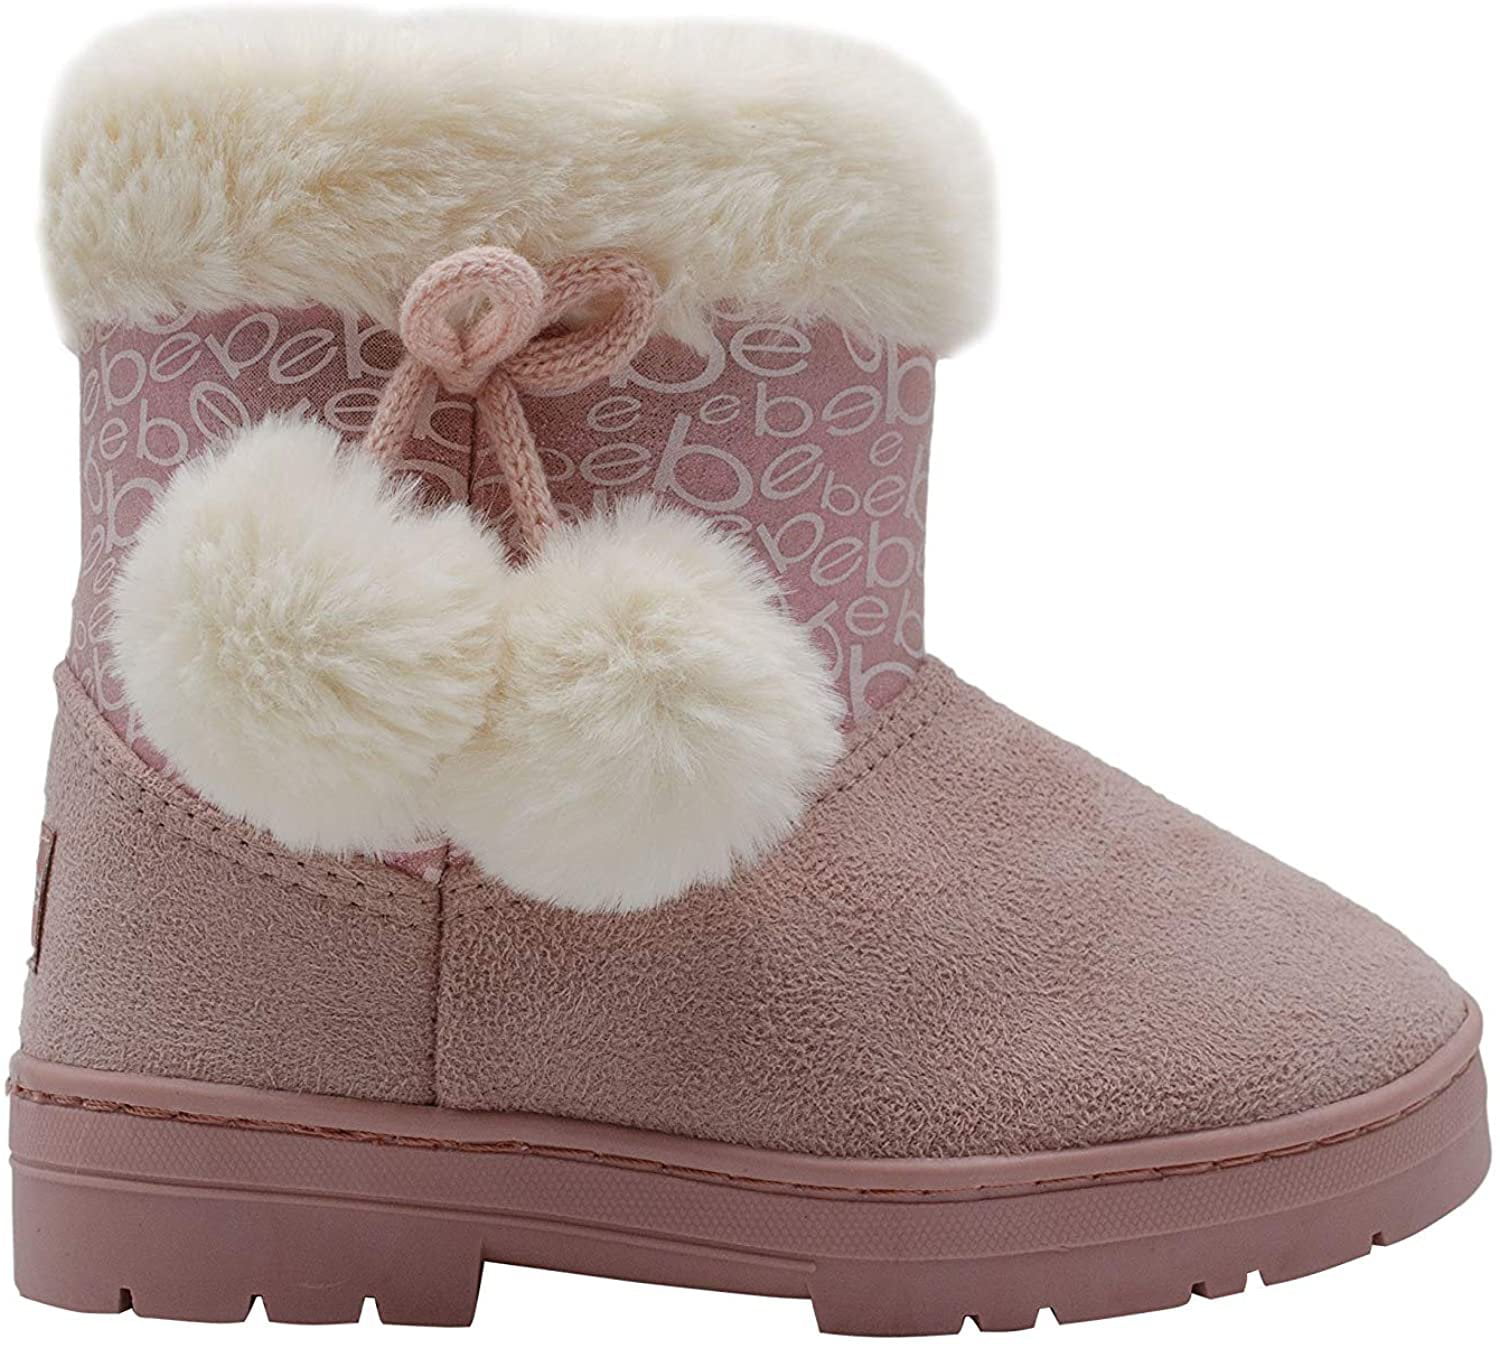 bebe Girls Microsuede Winter Boots with Faux Fur Cuffs Casual Warm Slip-On Shoes 